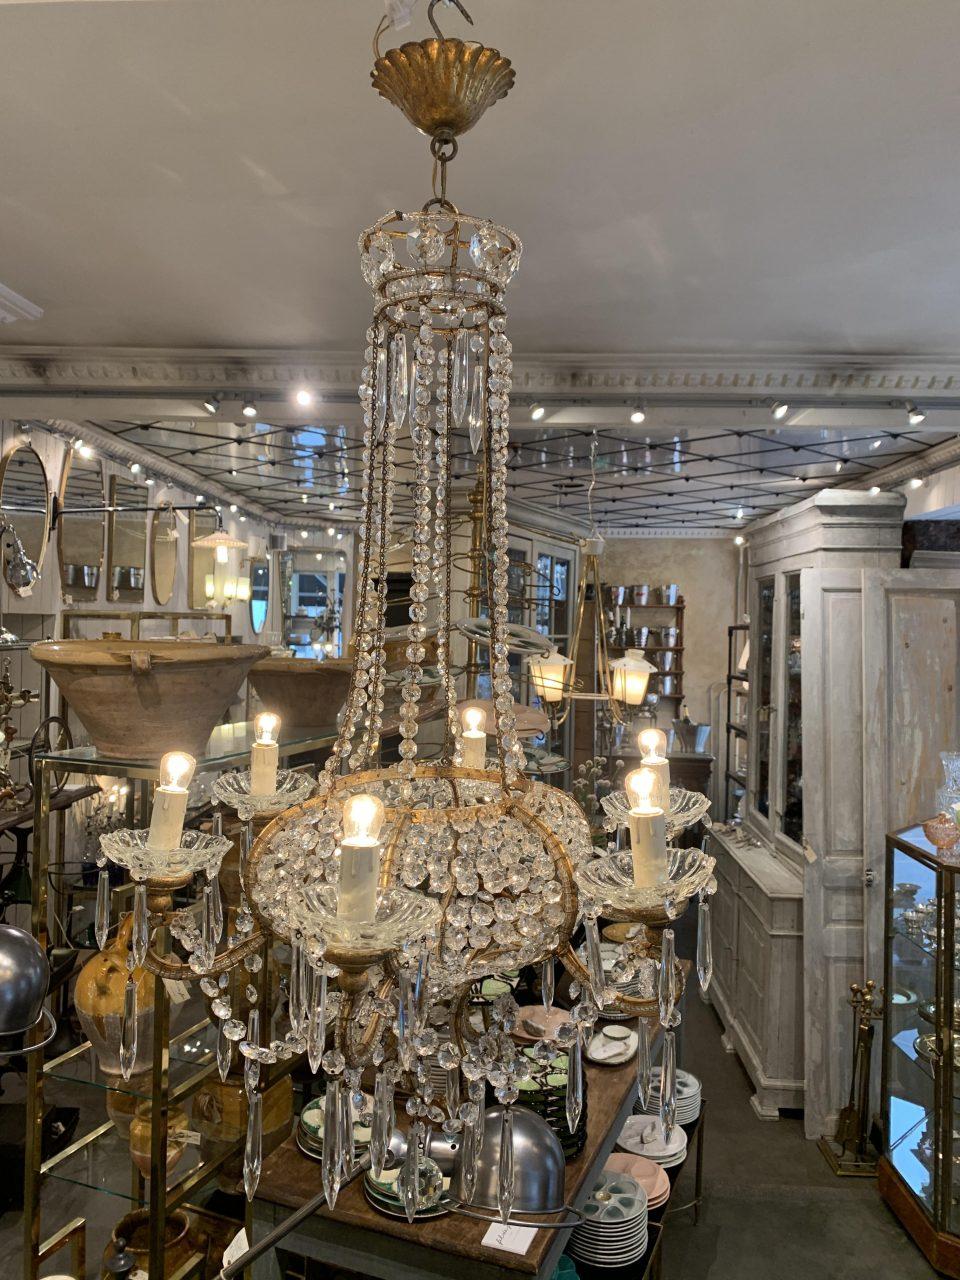 Exquisite and stately drop-shaped crystal chandelier /ceiling lamp. France, circa early 1900s.

Elegantly designed with a beautiful gilded iron frame, on which sit 6 small gilded wood light pipes with pale cuffs in clear glass.

Hundreds of